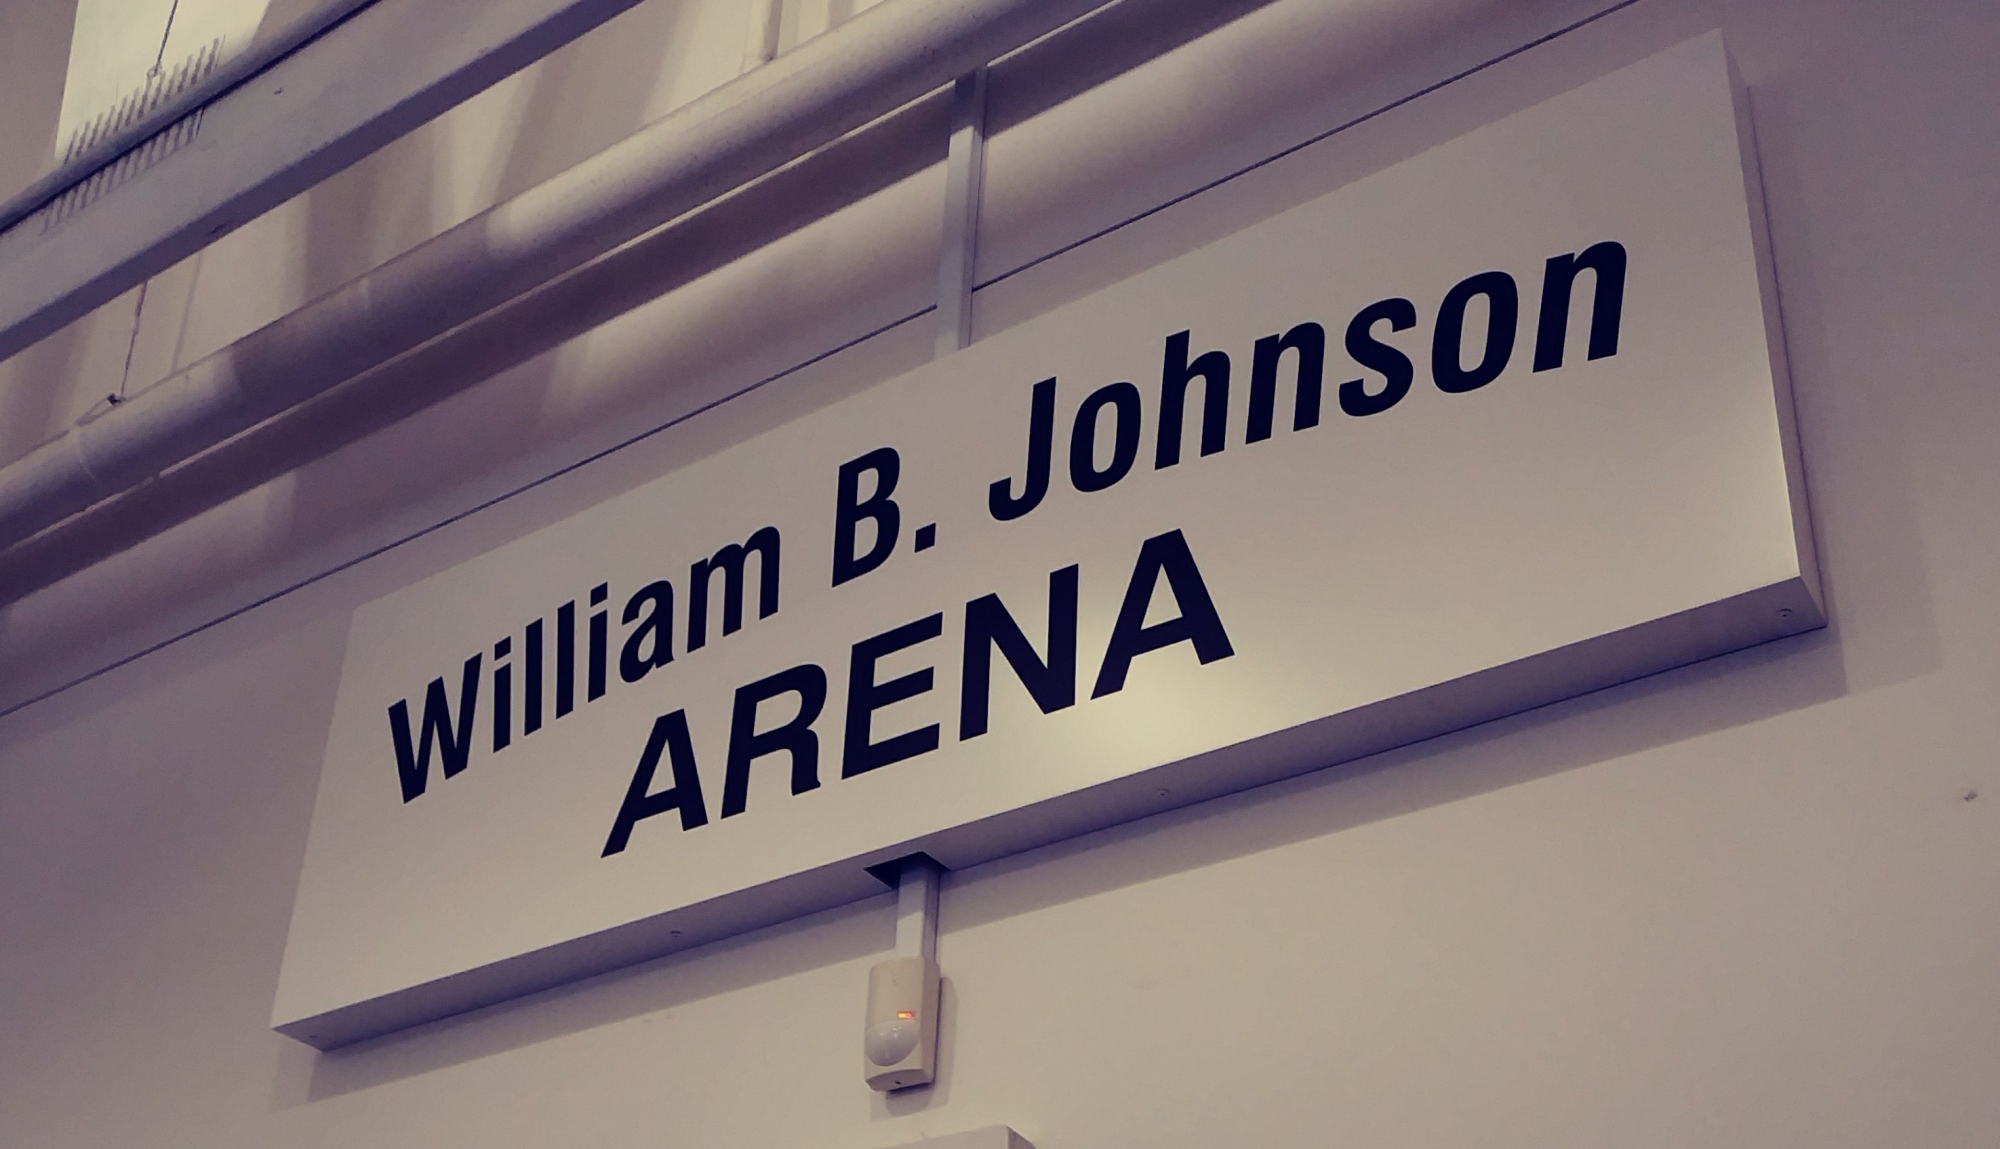 The William B. Johnson Arena was dedicated at the May 24 memorial.